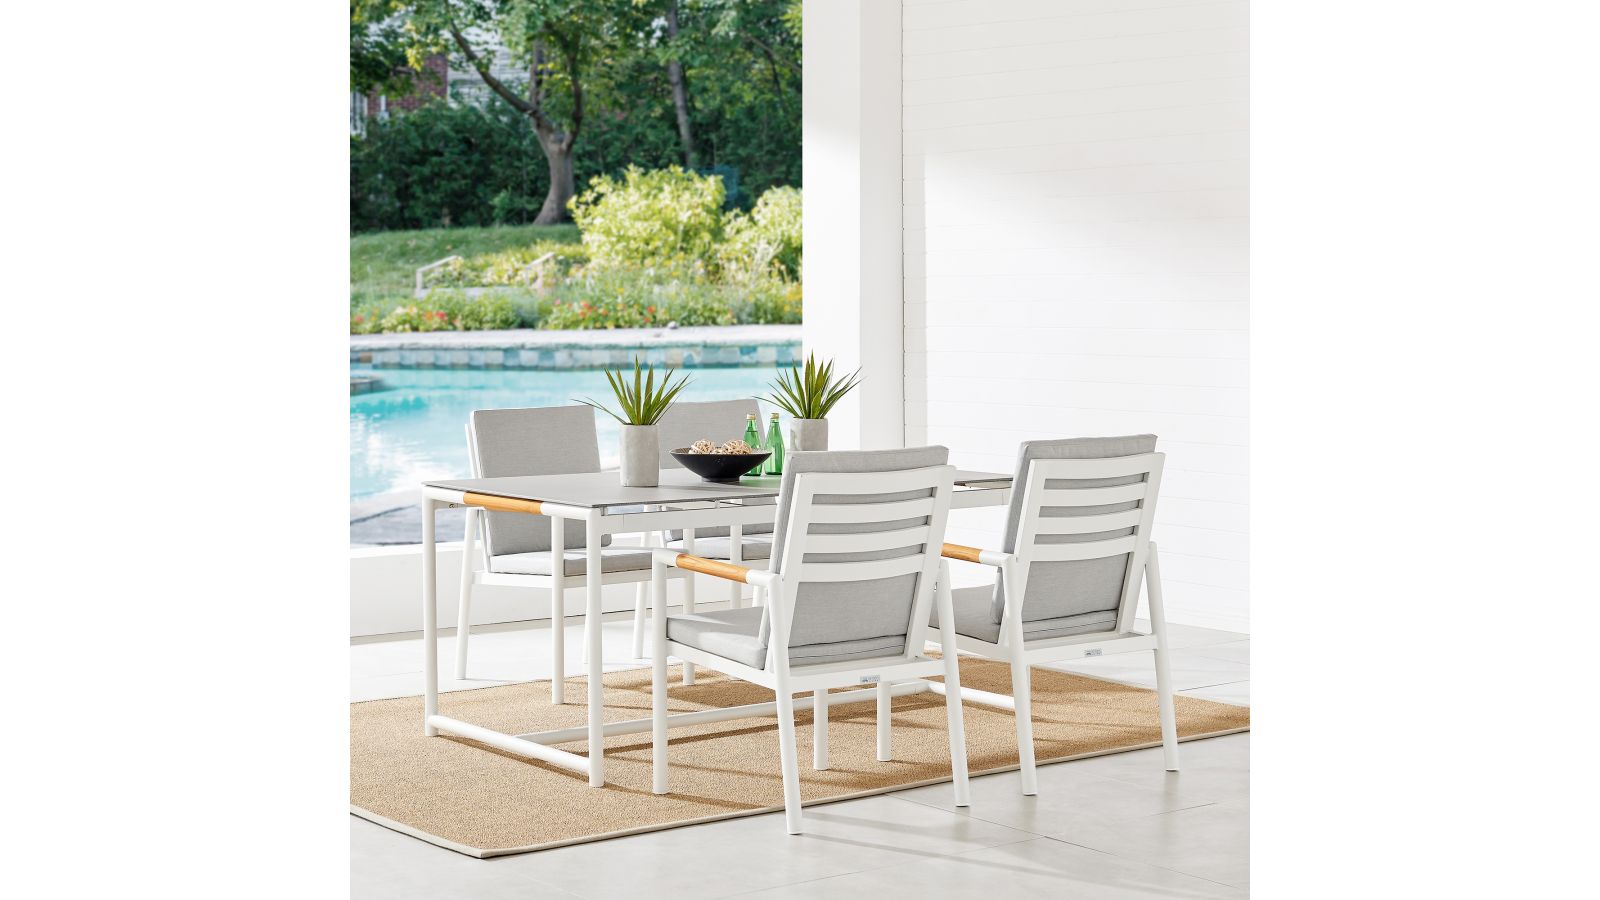 Crown 5 Piece White Aluminum and Teak Outdoor Dining Set with Light Gray Fabric